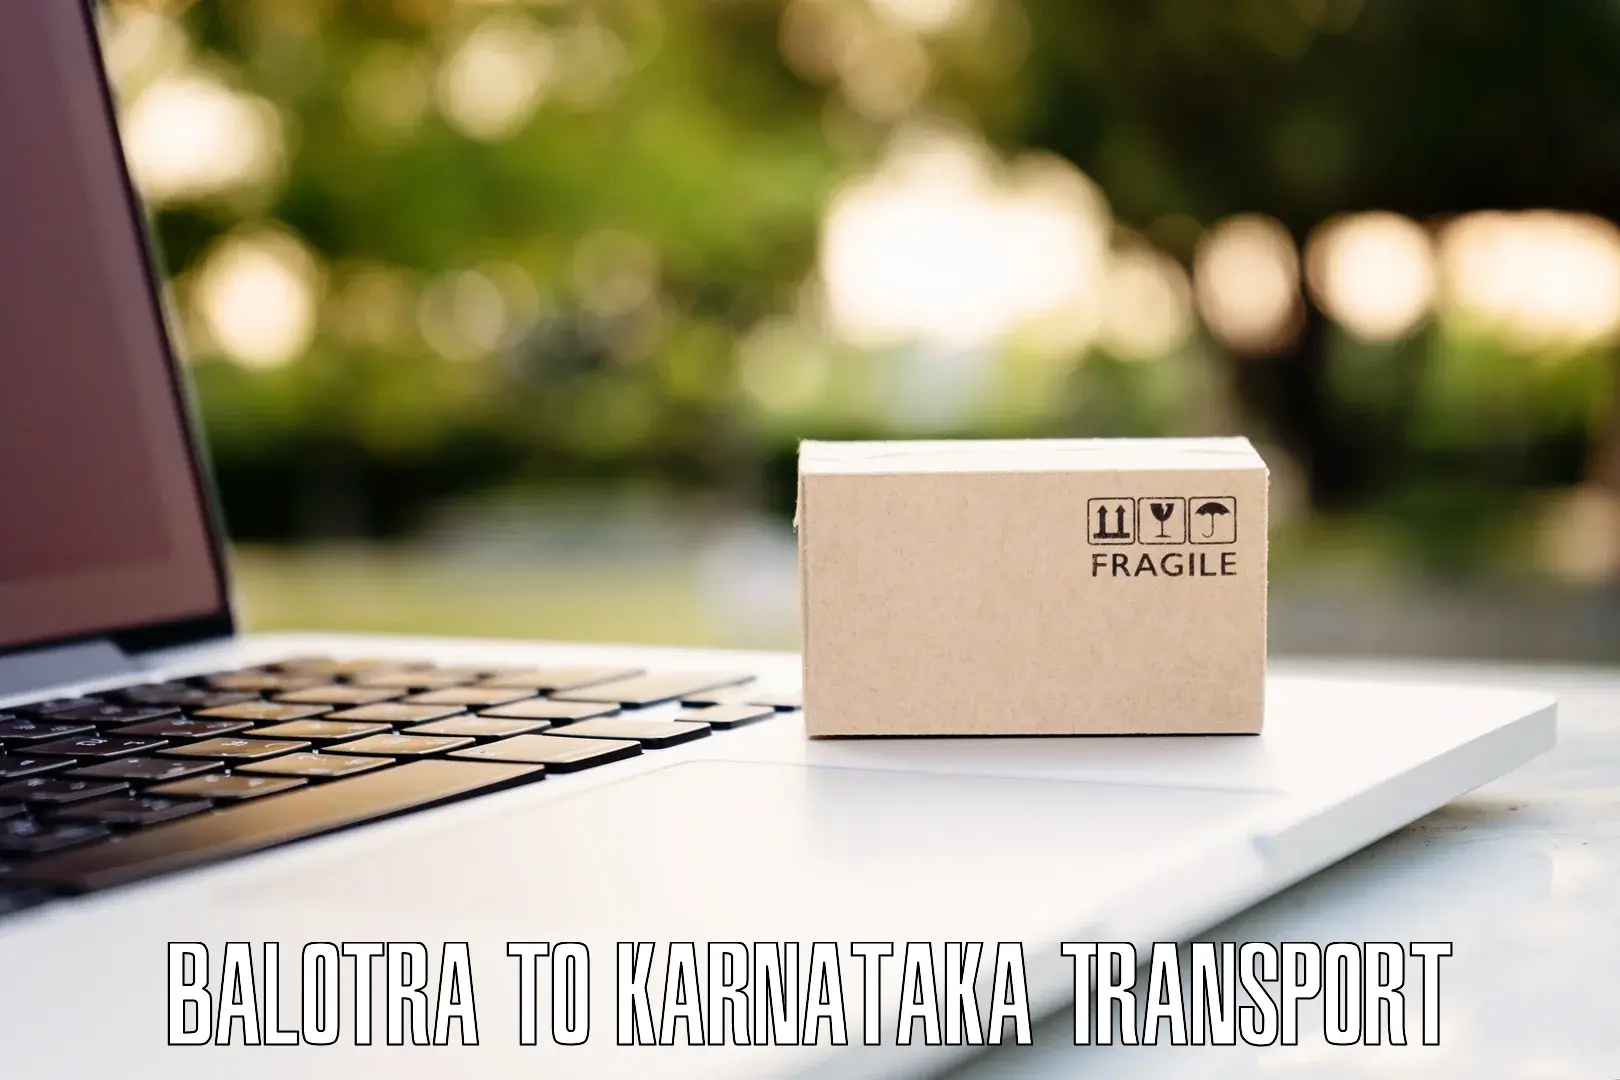 Road transport online services Balotra to Holesirigere